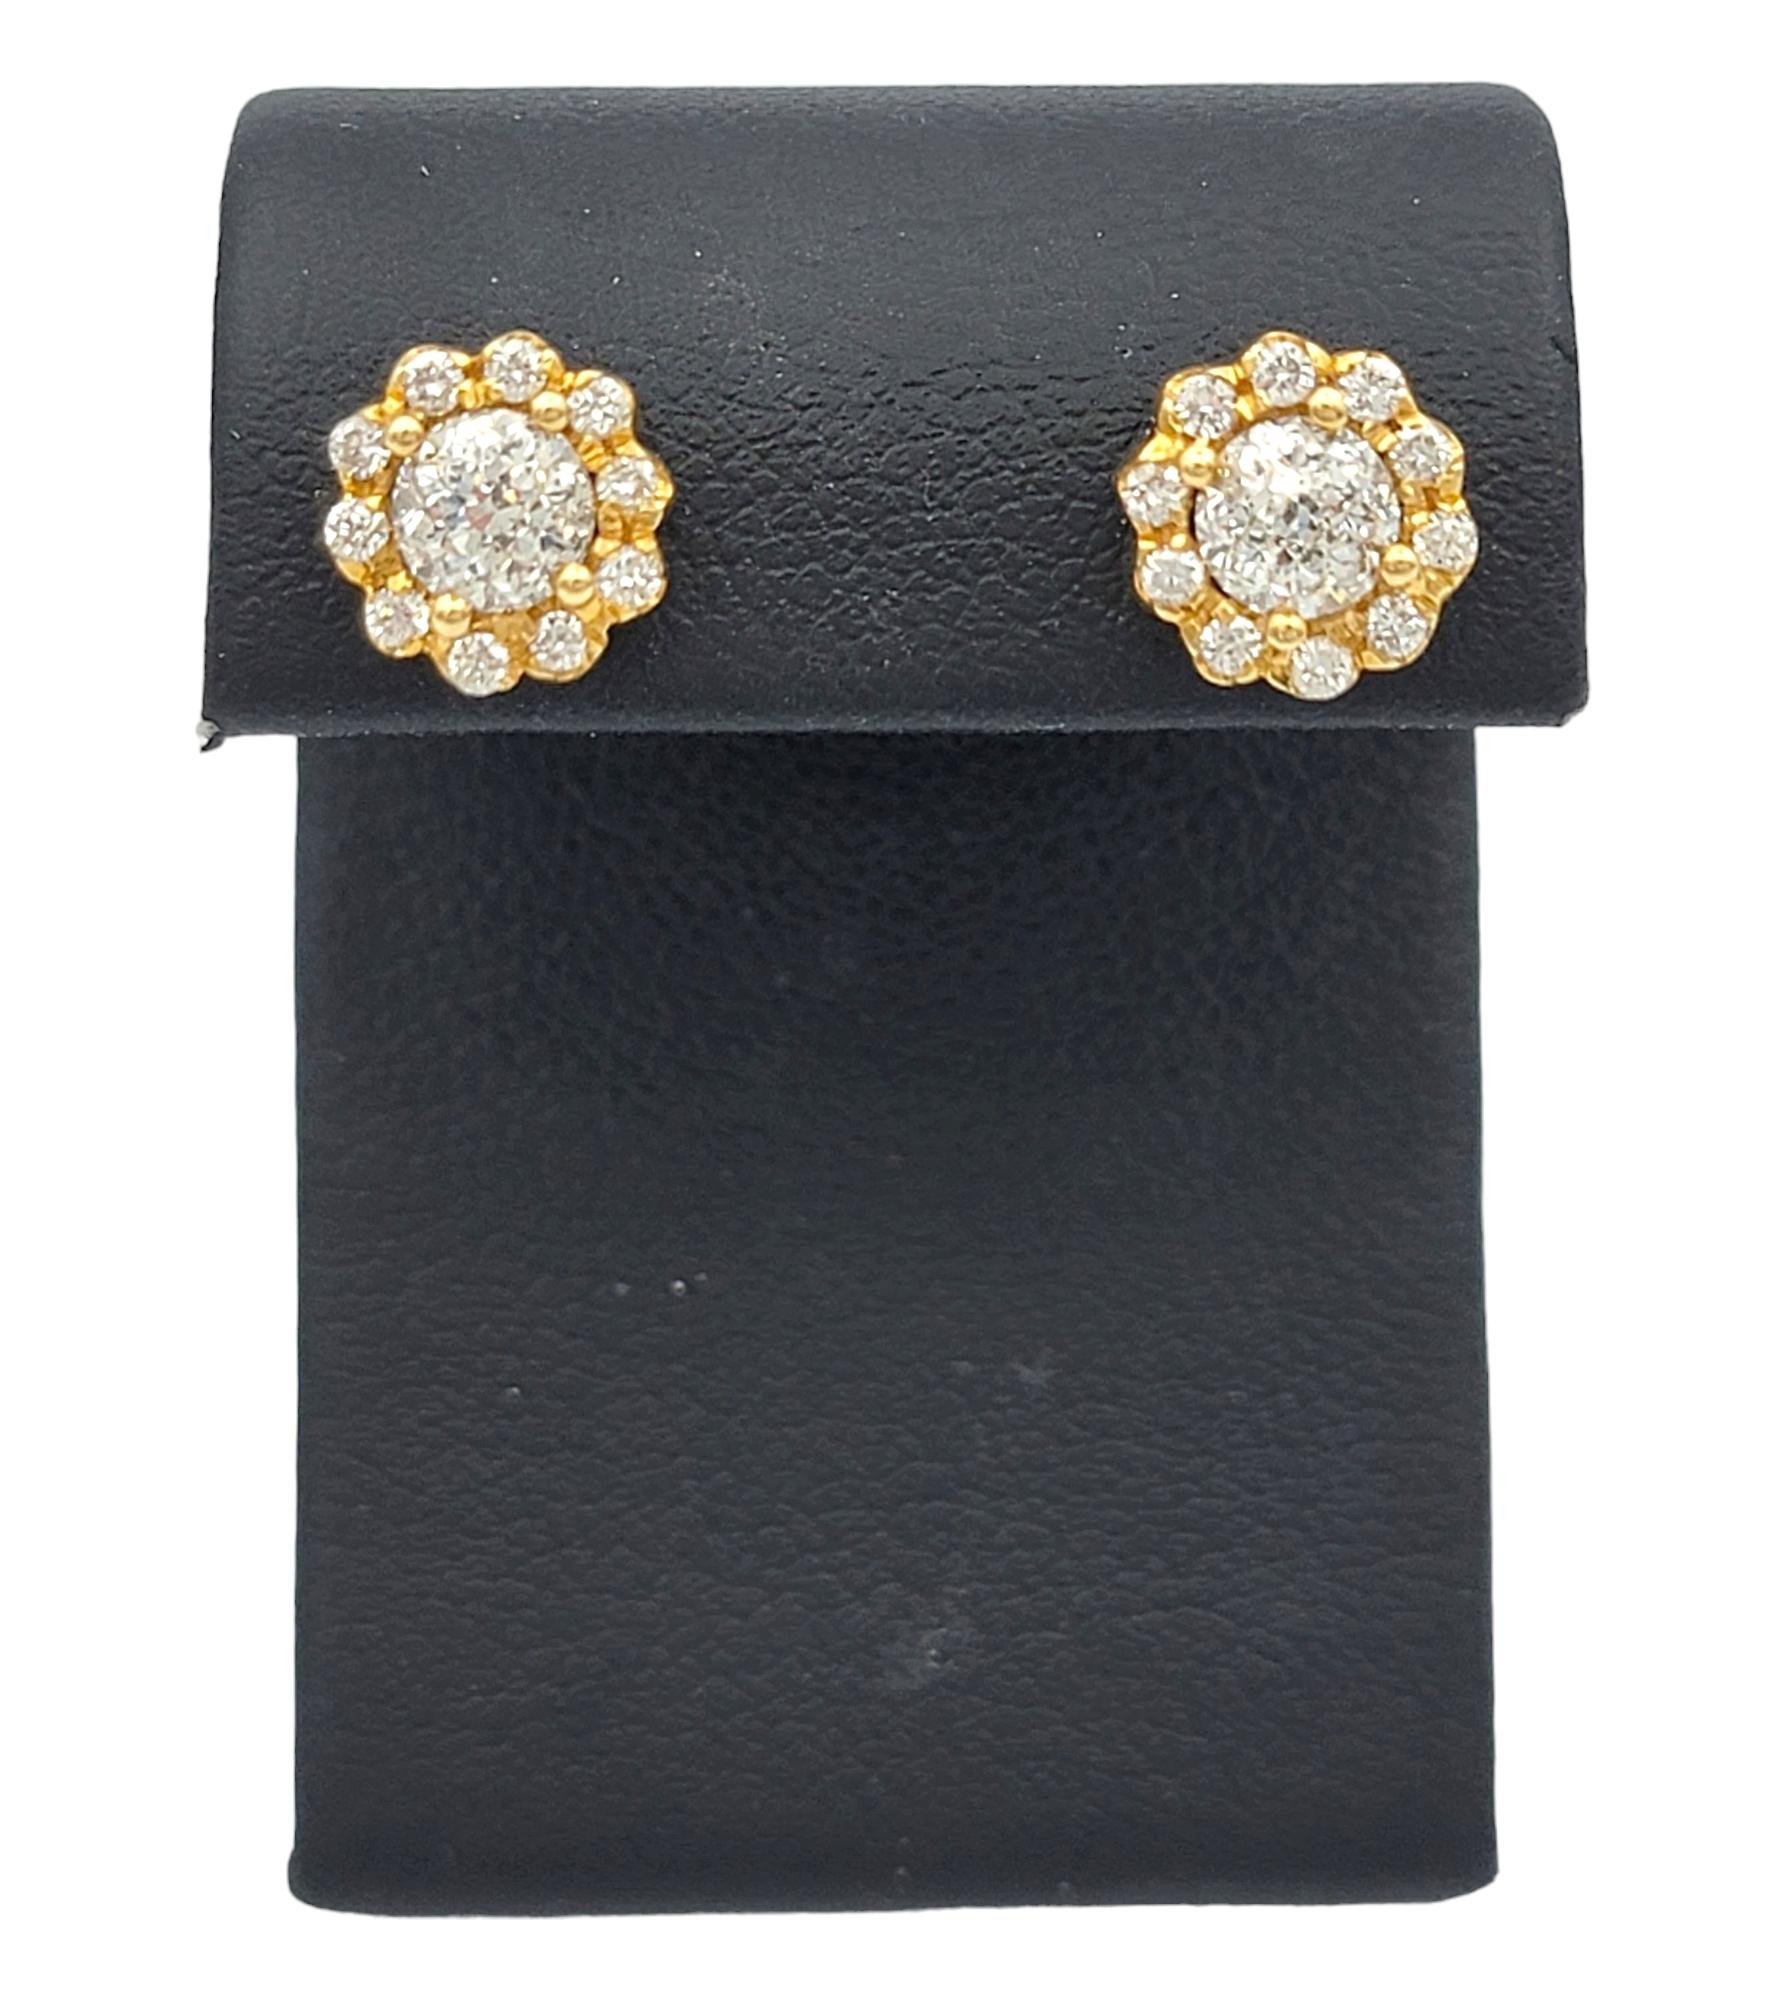 Round Cut Crown of Light Diamond Stud Earrings with Halo Flower Motif in 18 Karat Gold For Sale